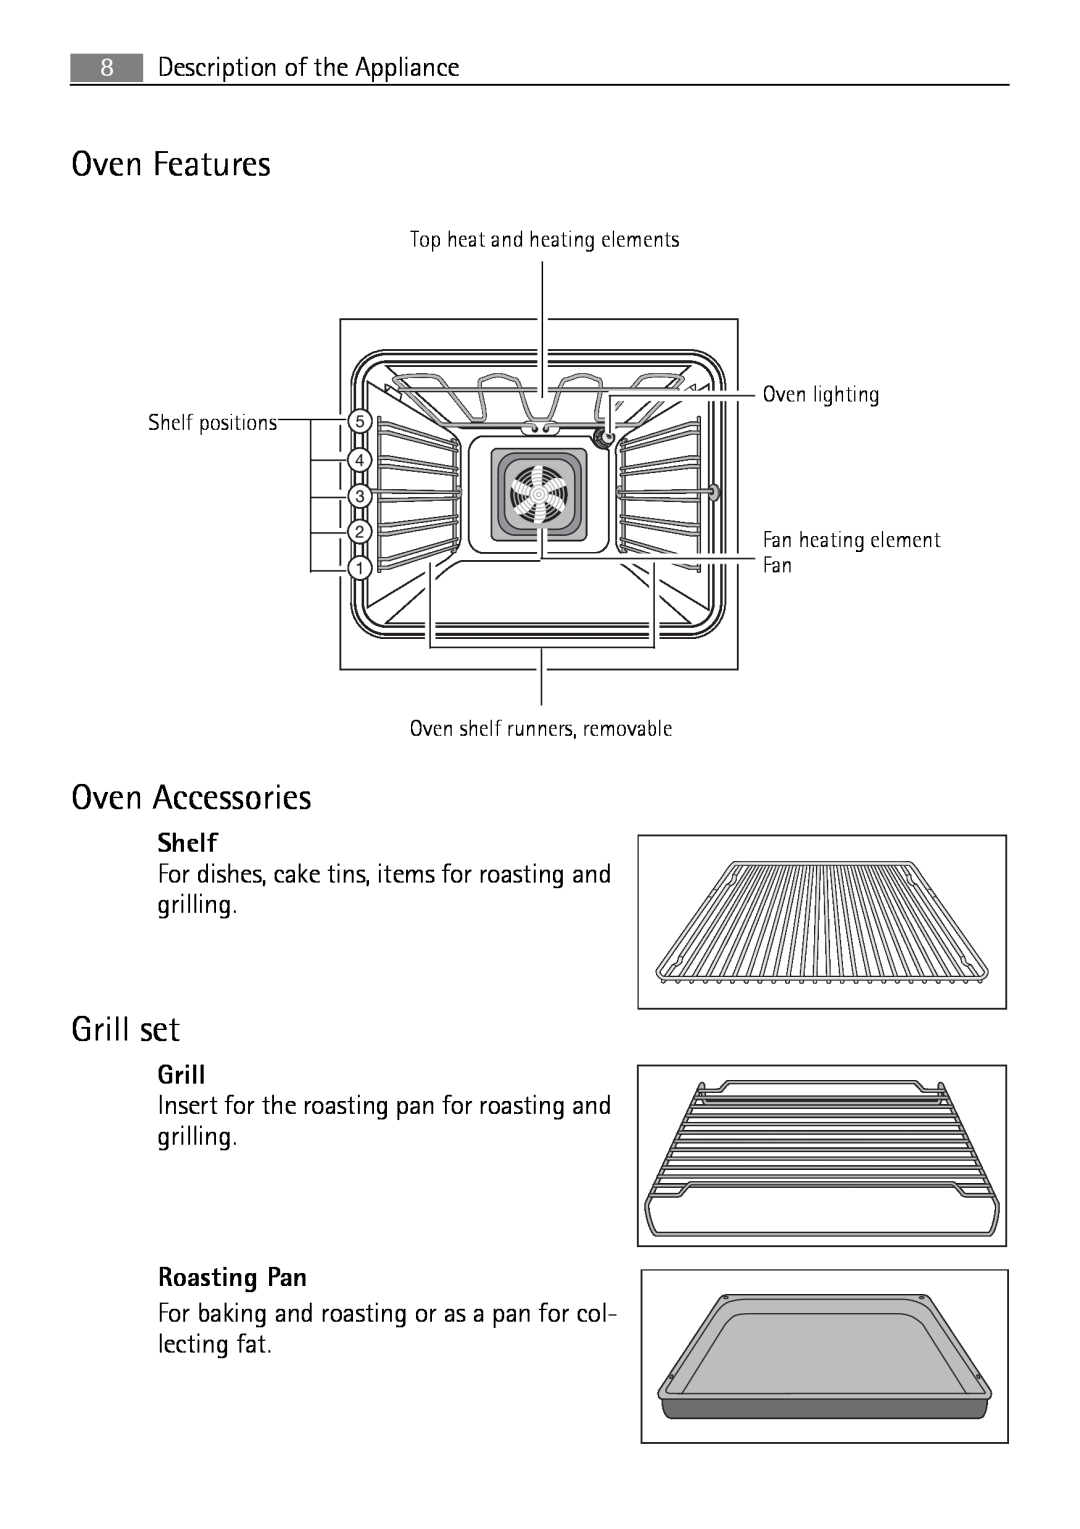 Electrolux B2100-5 user manual Oven Features, Oven Accessories, Grill set, Shelf, Roasting Pan 